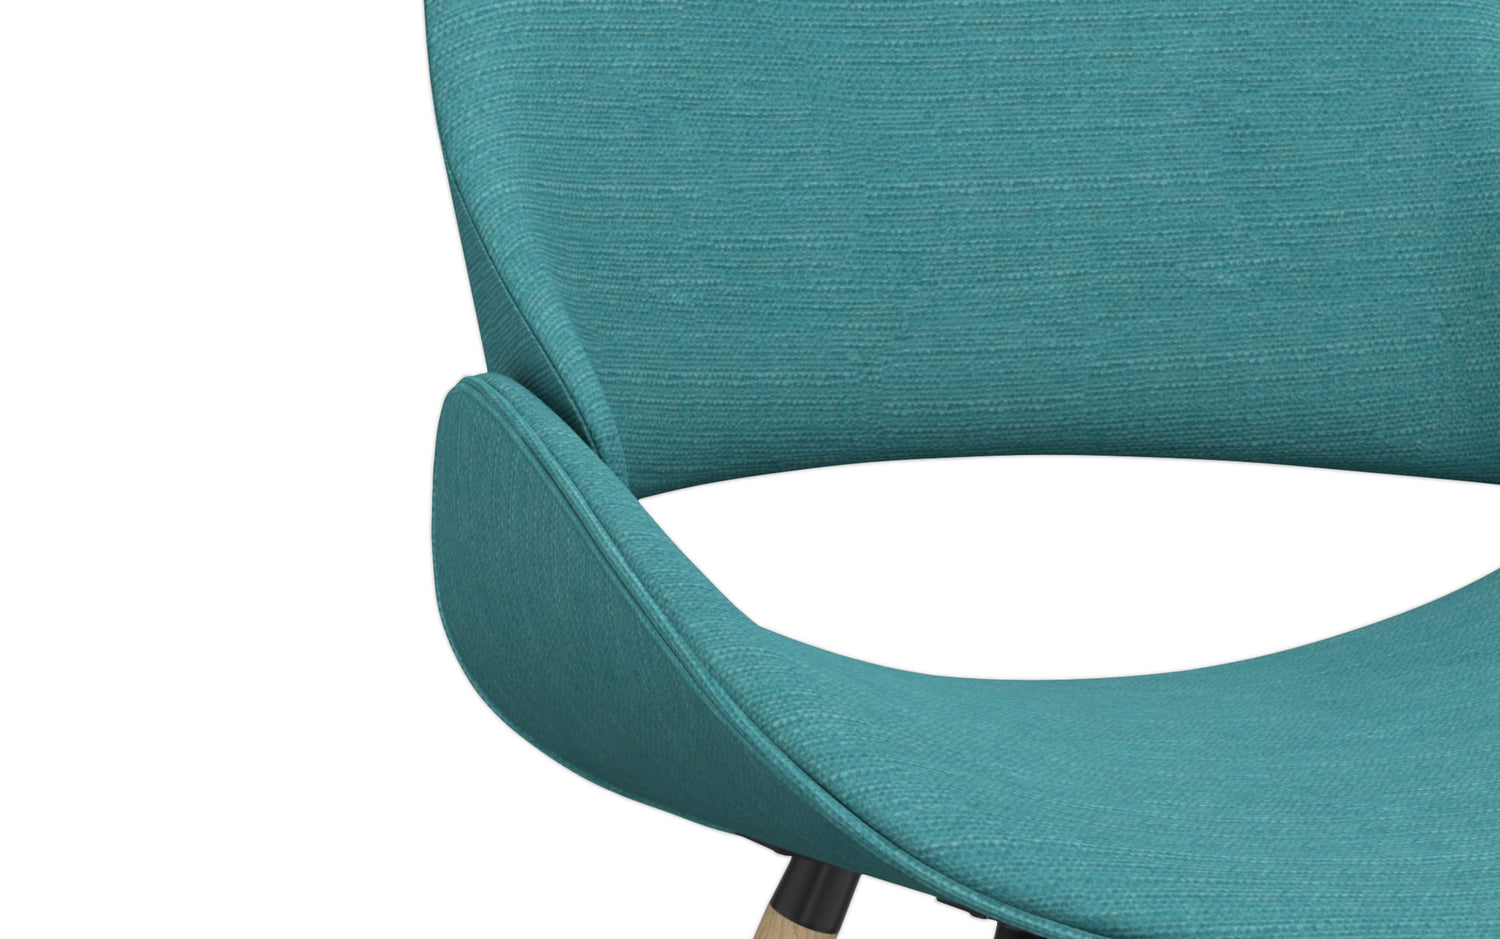 Turquoise Blue Natural Oak | Malden Bentwood Dining Chair